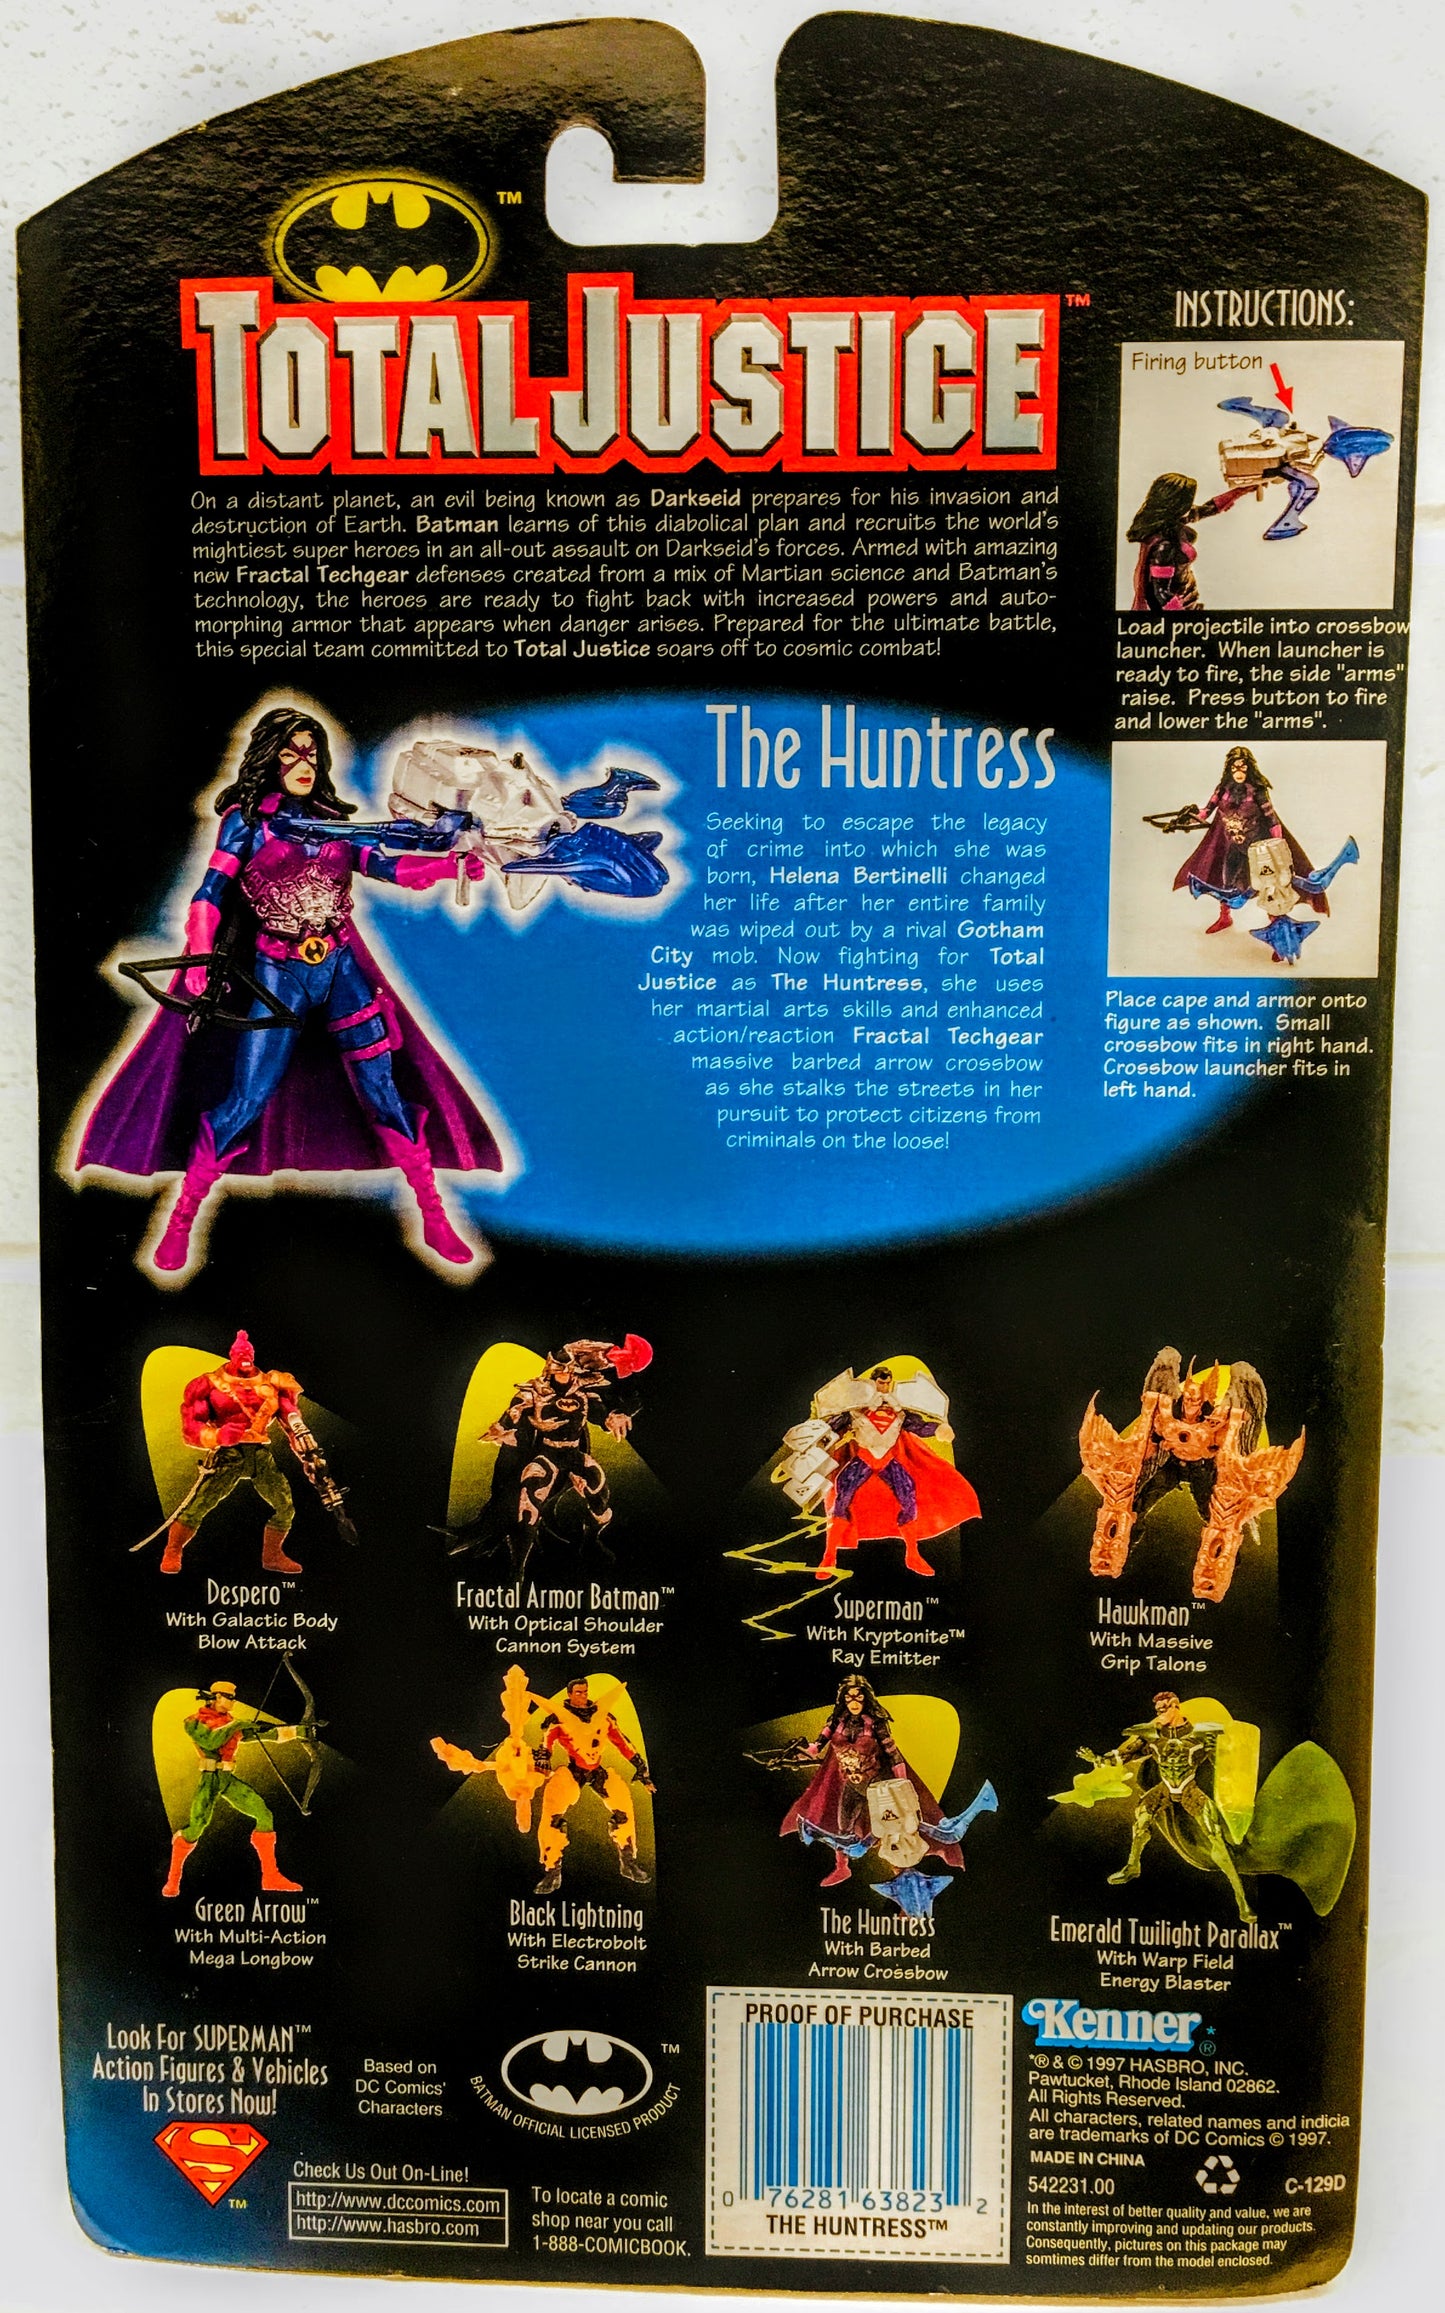 Total Justice: The Huntress